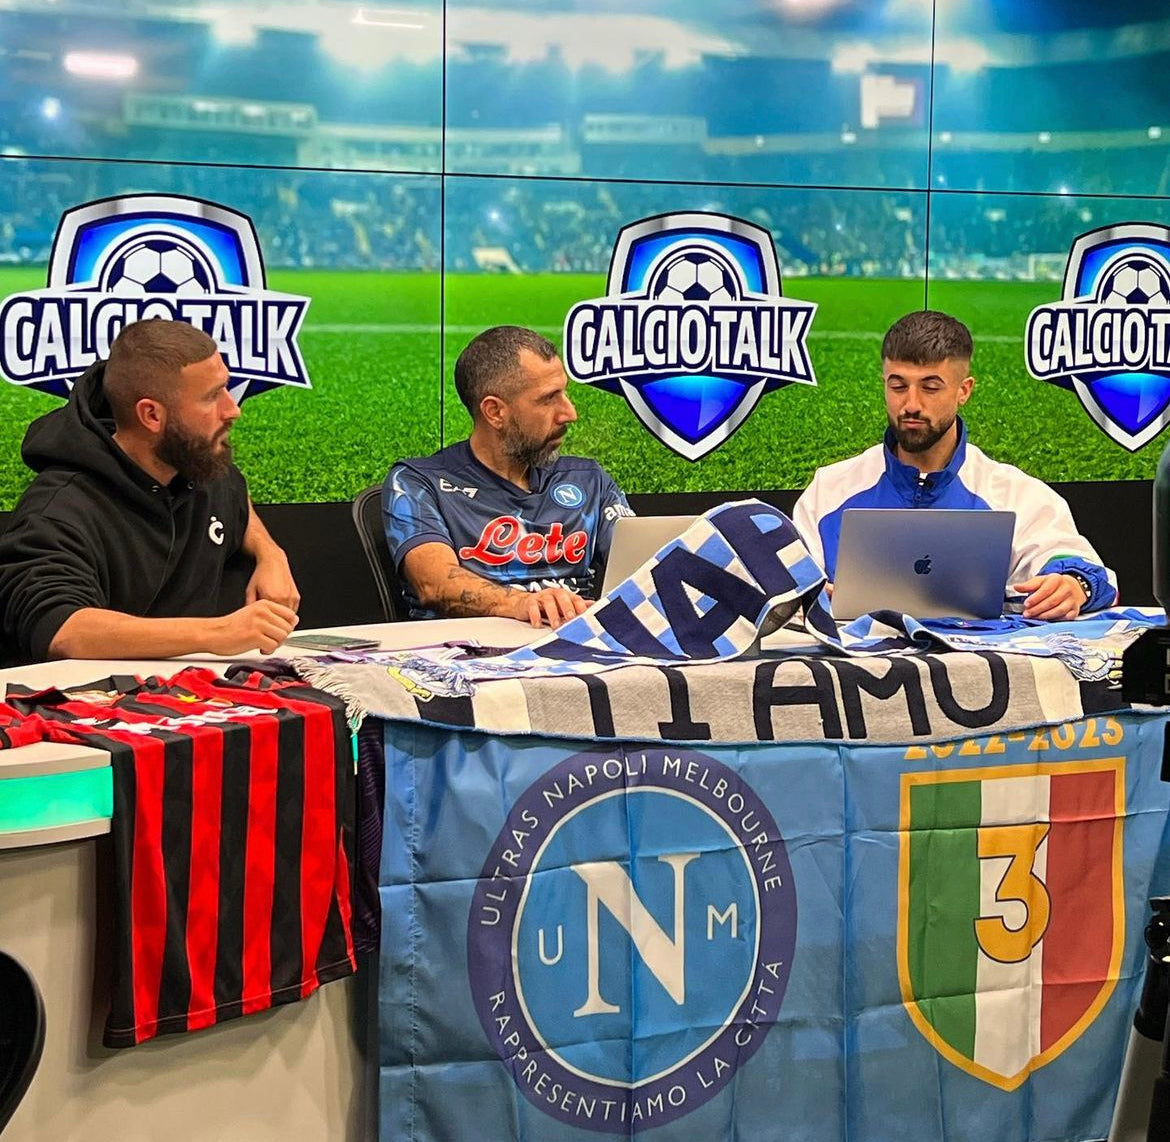 CALCIO TALK - The Serie A to Sunday League and Everything in Between